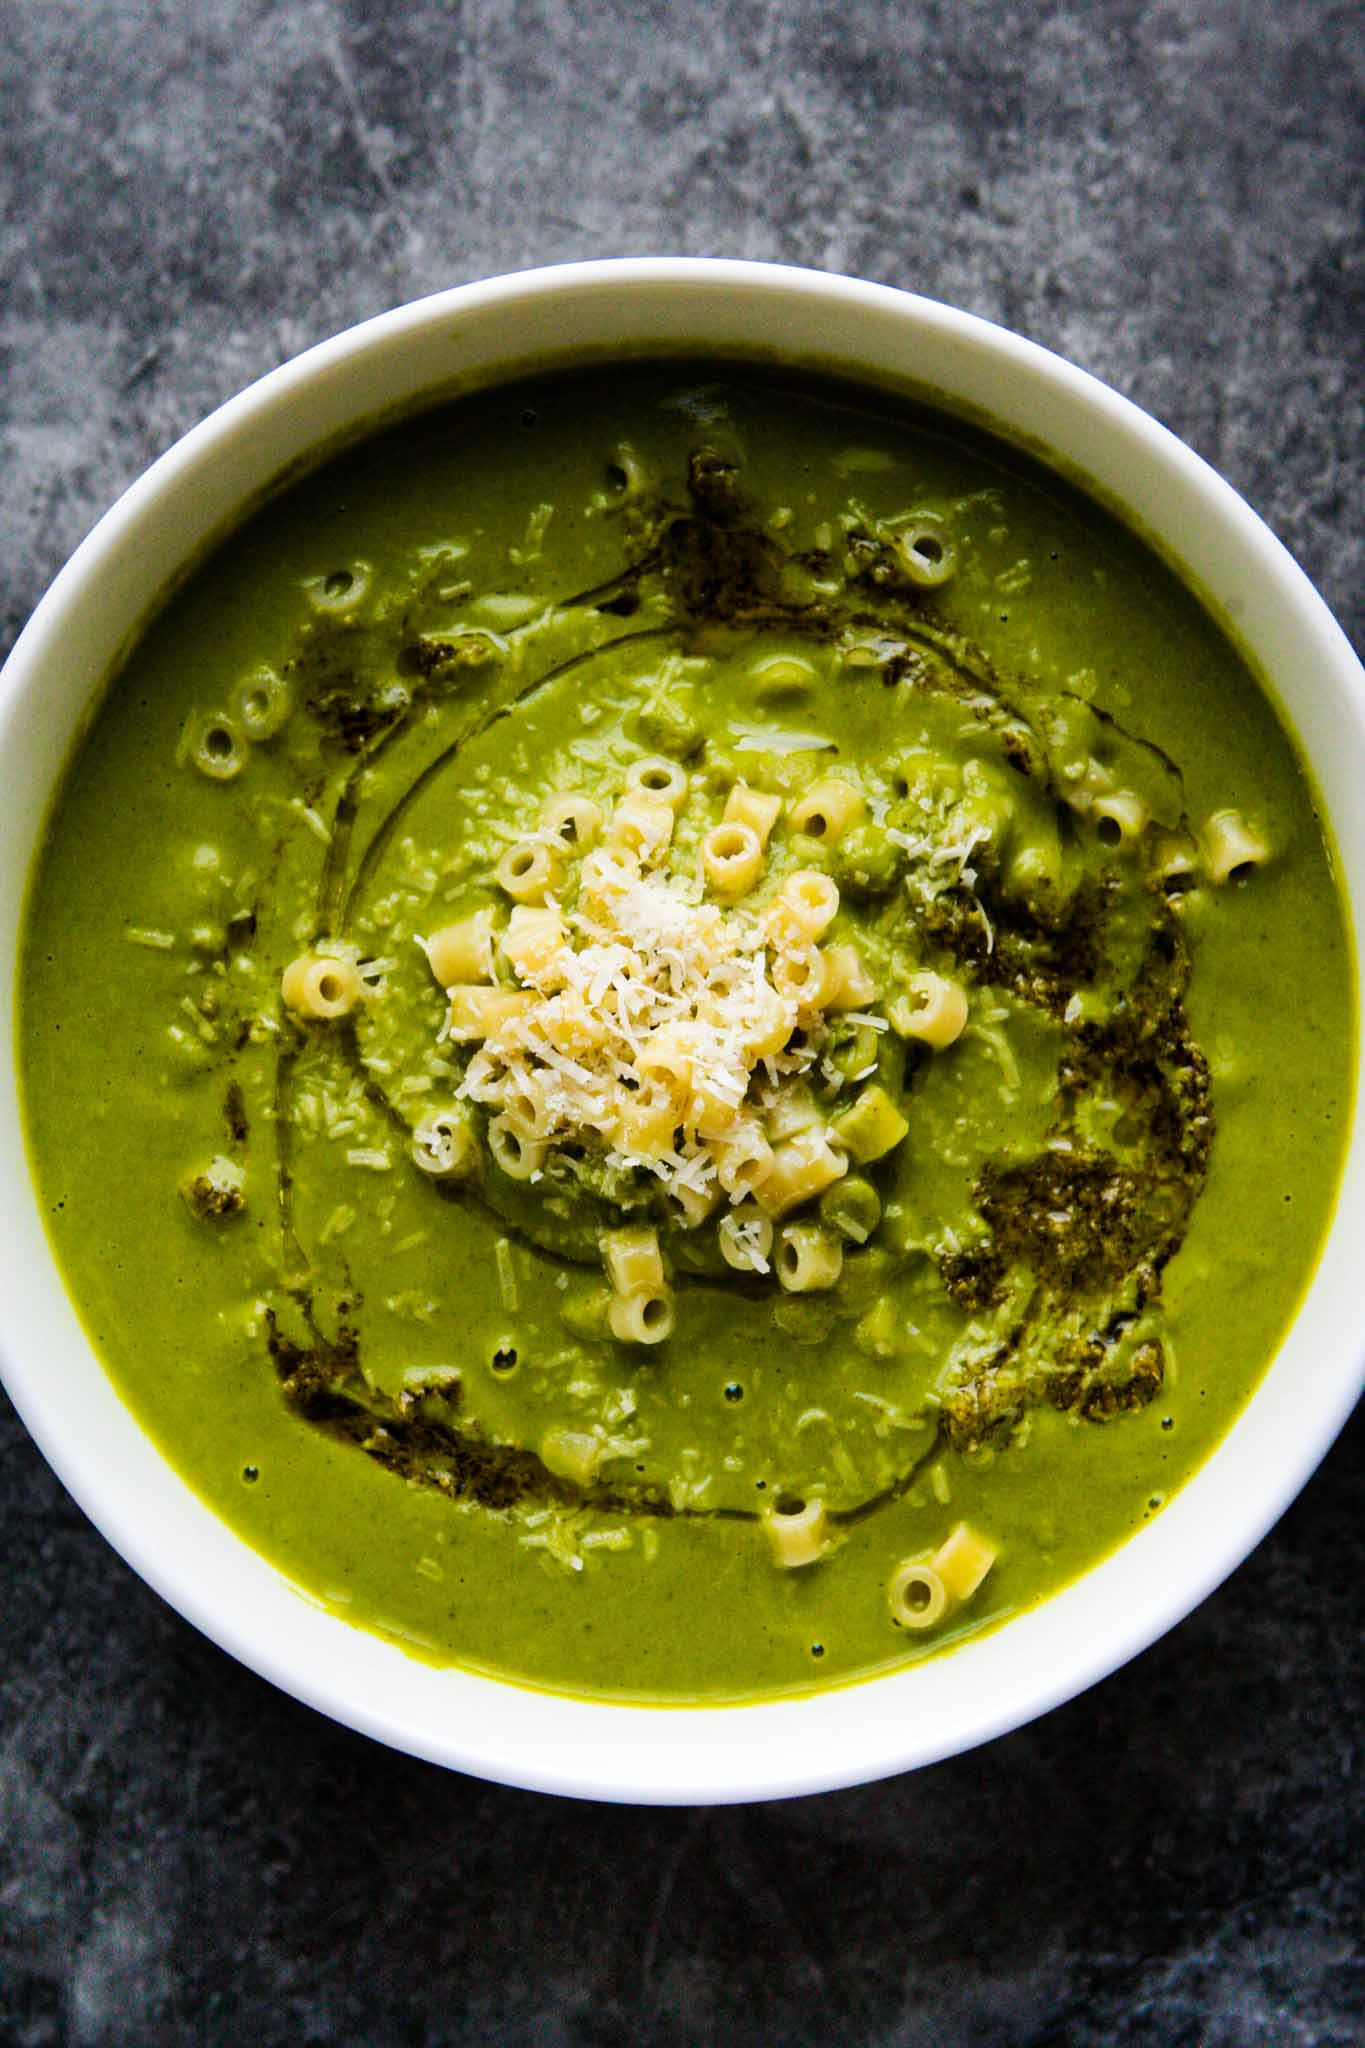 The Very Green Soup